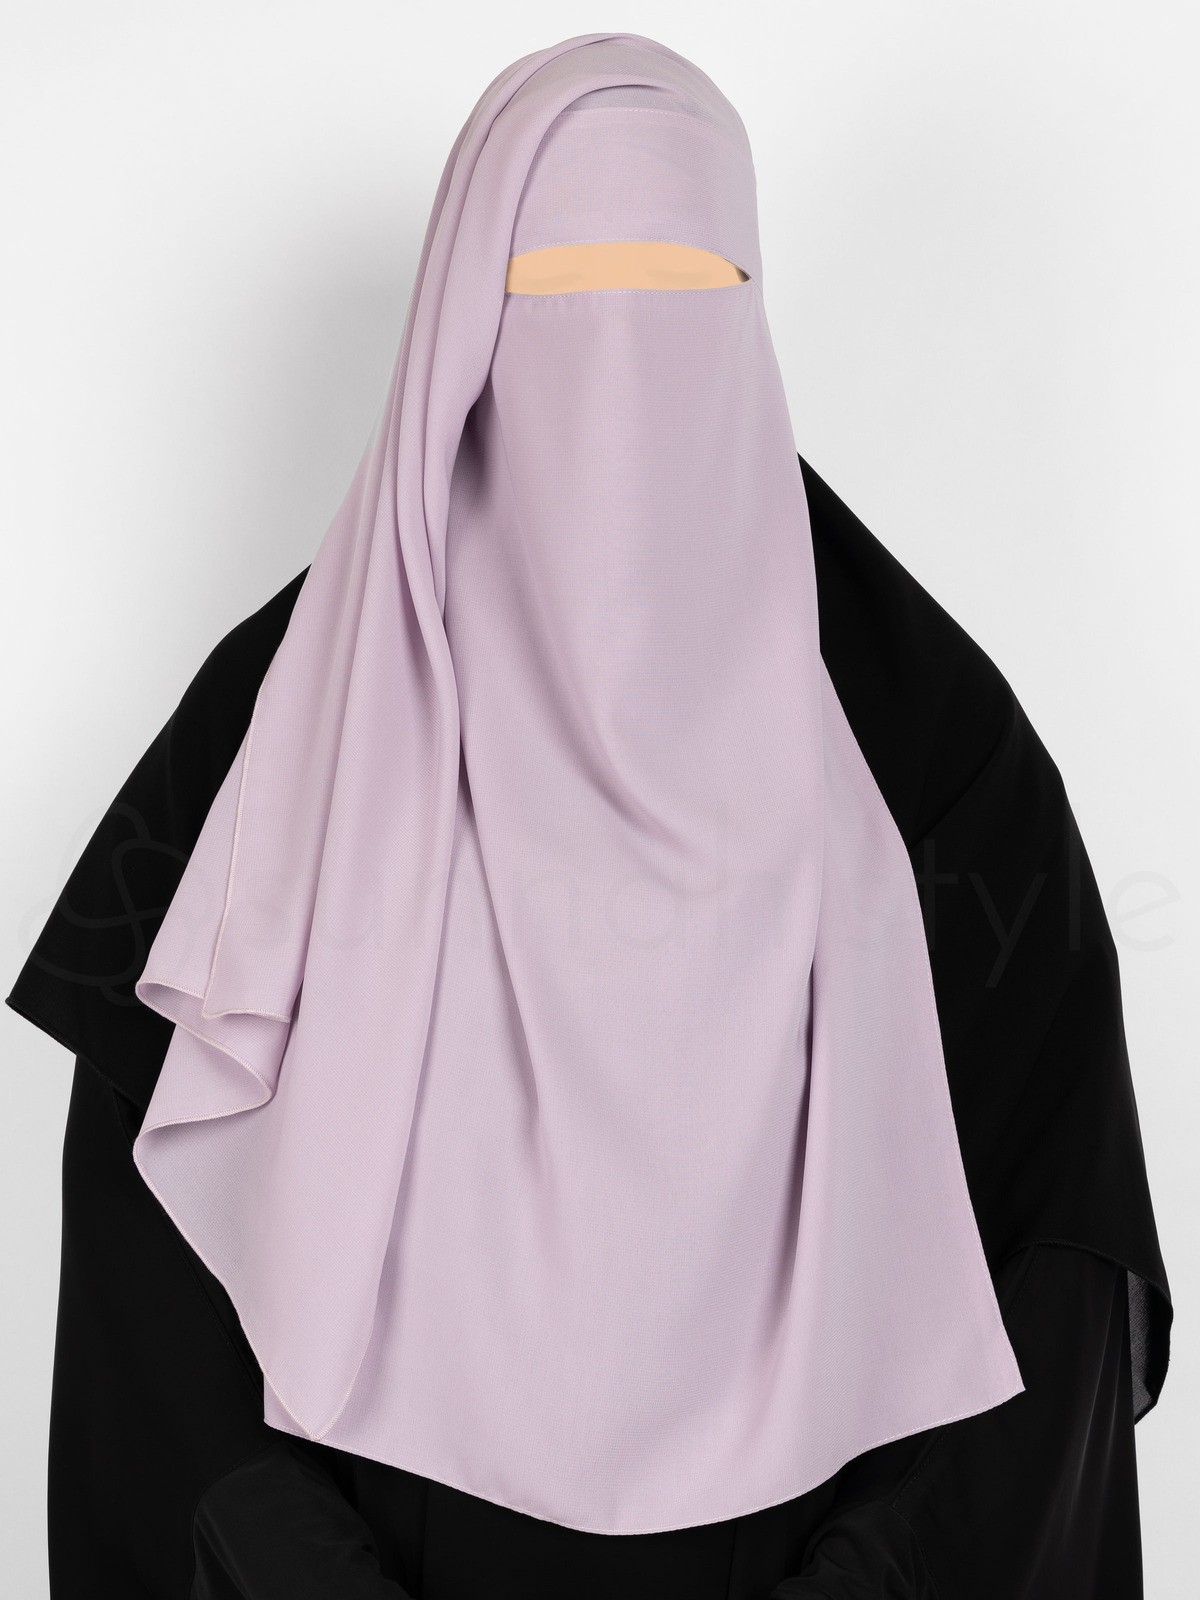 Sunnah Style - Long Two Layer Niqab (Lavender)